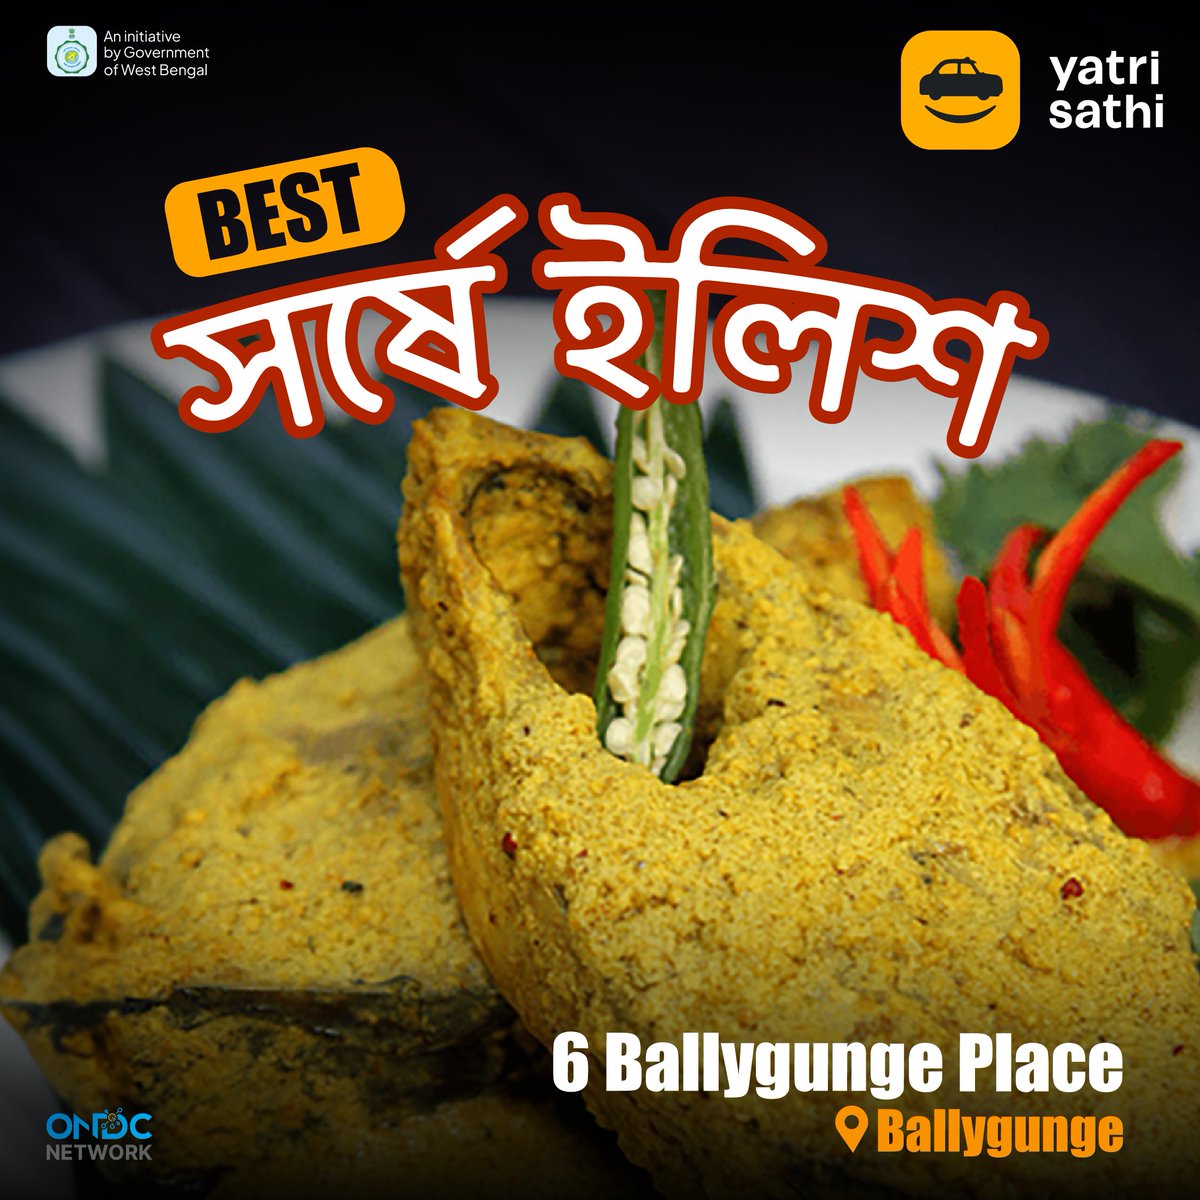 If your mood needs a pick-up, there's Shorshe ilish. ❤️😋🤤
And if you need a pick up, you know whom to call! 🚕
Download the app now! ⚡

#Food #KolkataFood #YatriSathi #AmarShohorAmarSofor #FoodTrails #KolkataDiaries